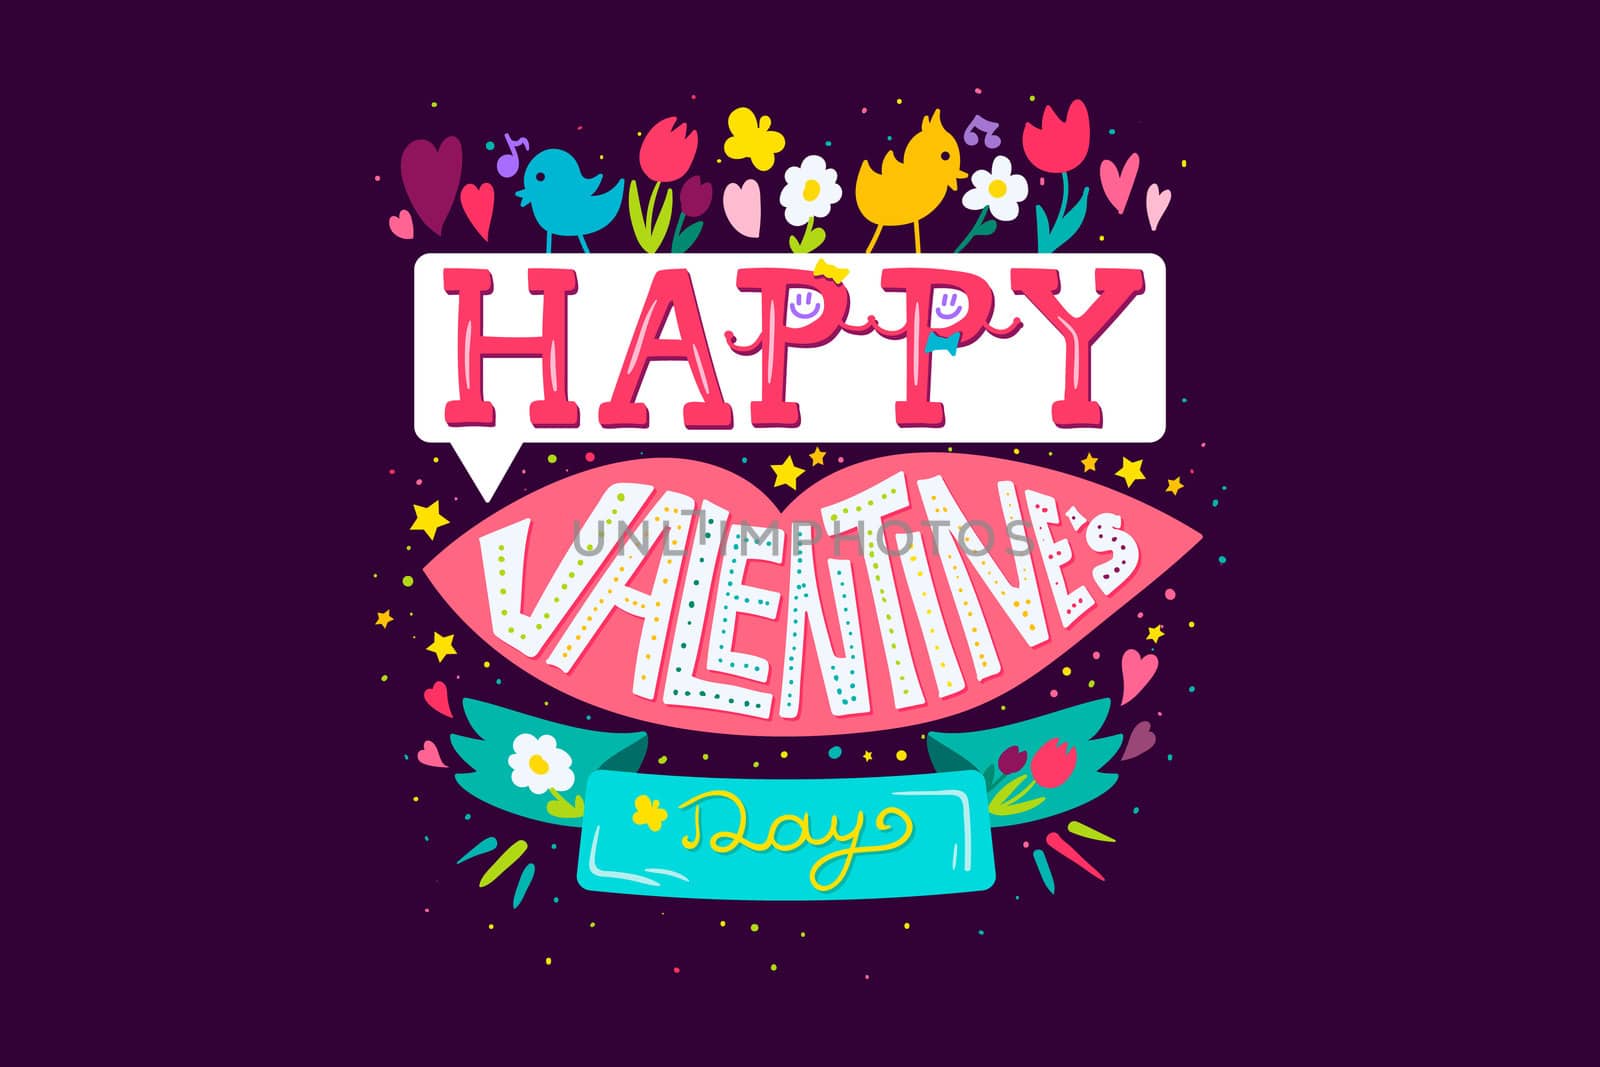 Happy Valentines Day Greeting Banner with pink lips, flowers, birds and hearts. Kiss. Vector